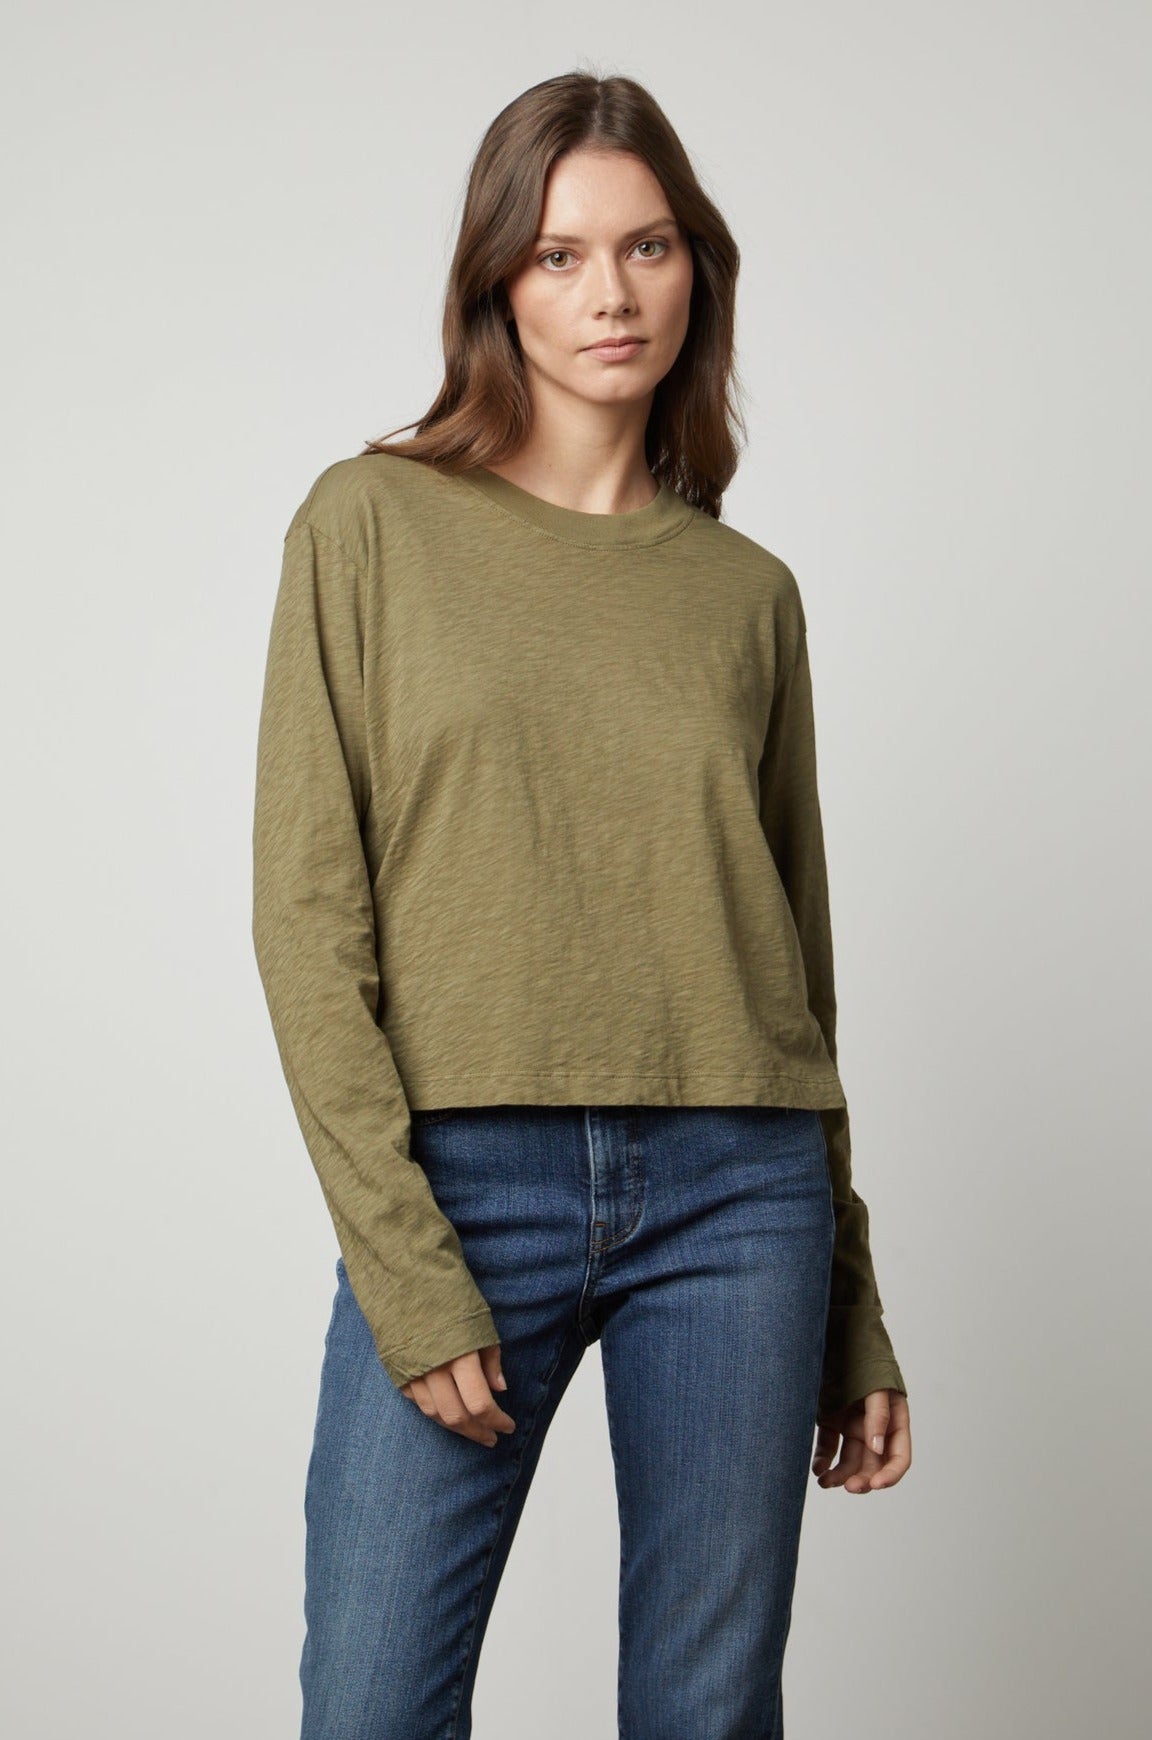 The Velvet by Graham & Spencer HEATHER CREW NECK CROPPED TEE in olive green.-35655736066241